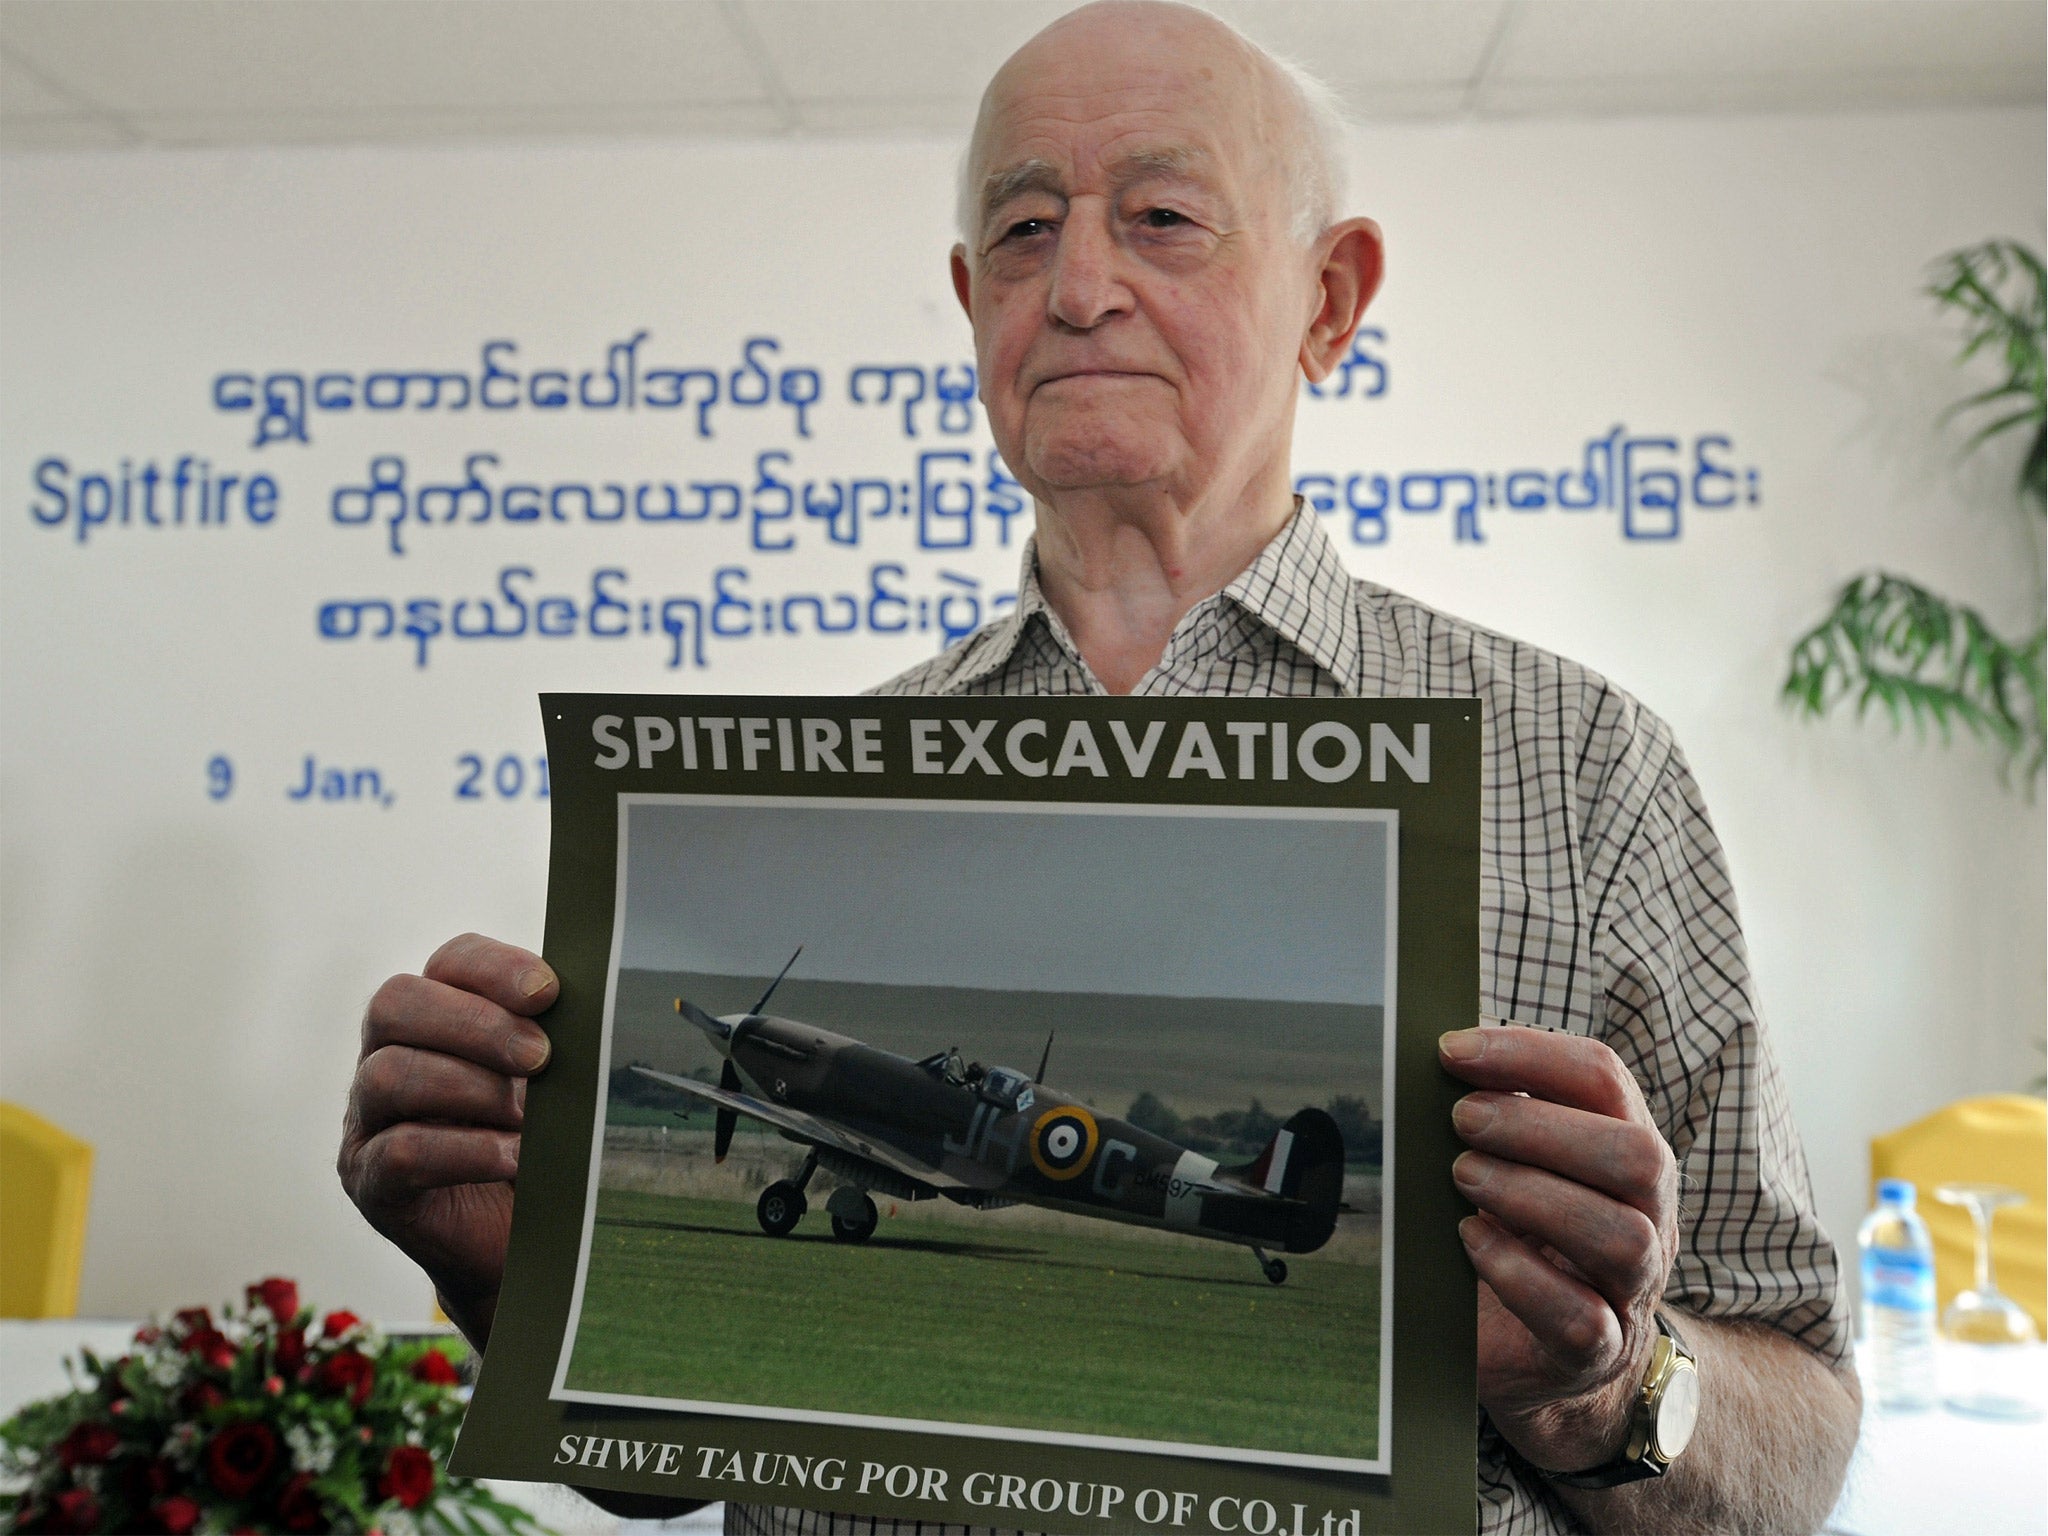 Stanley Coombe, a 91-year-old former British soldier, poses with a photo of a Spitfire